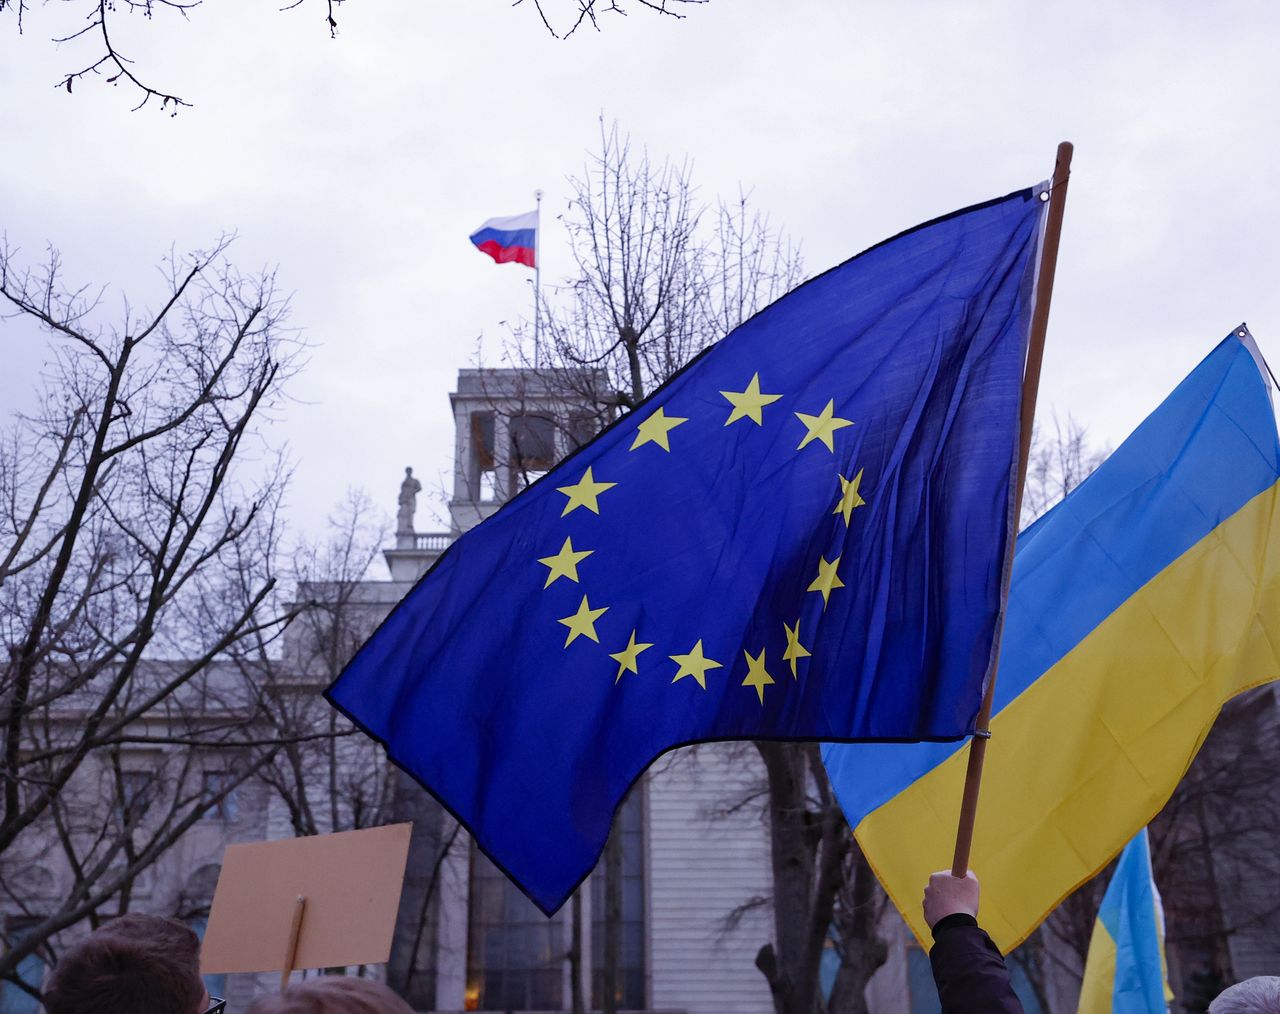 Ukrainian and EU flags in front of the Embassy of the Russian Federation in Berlin